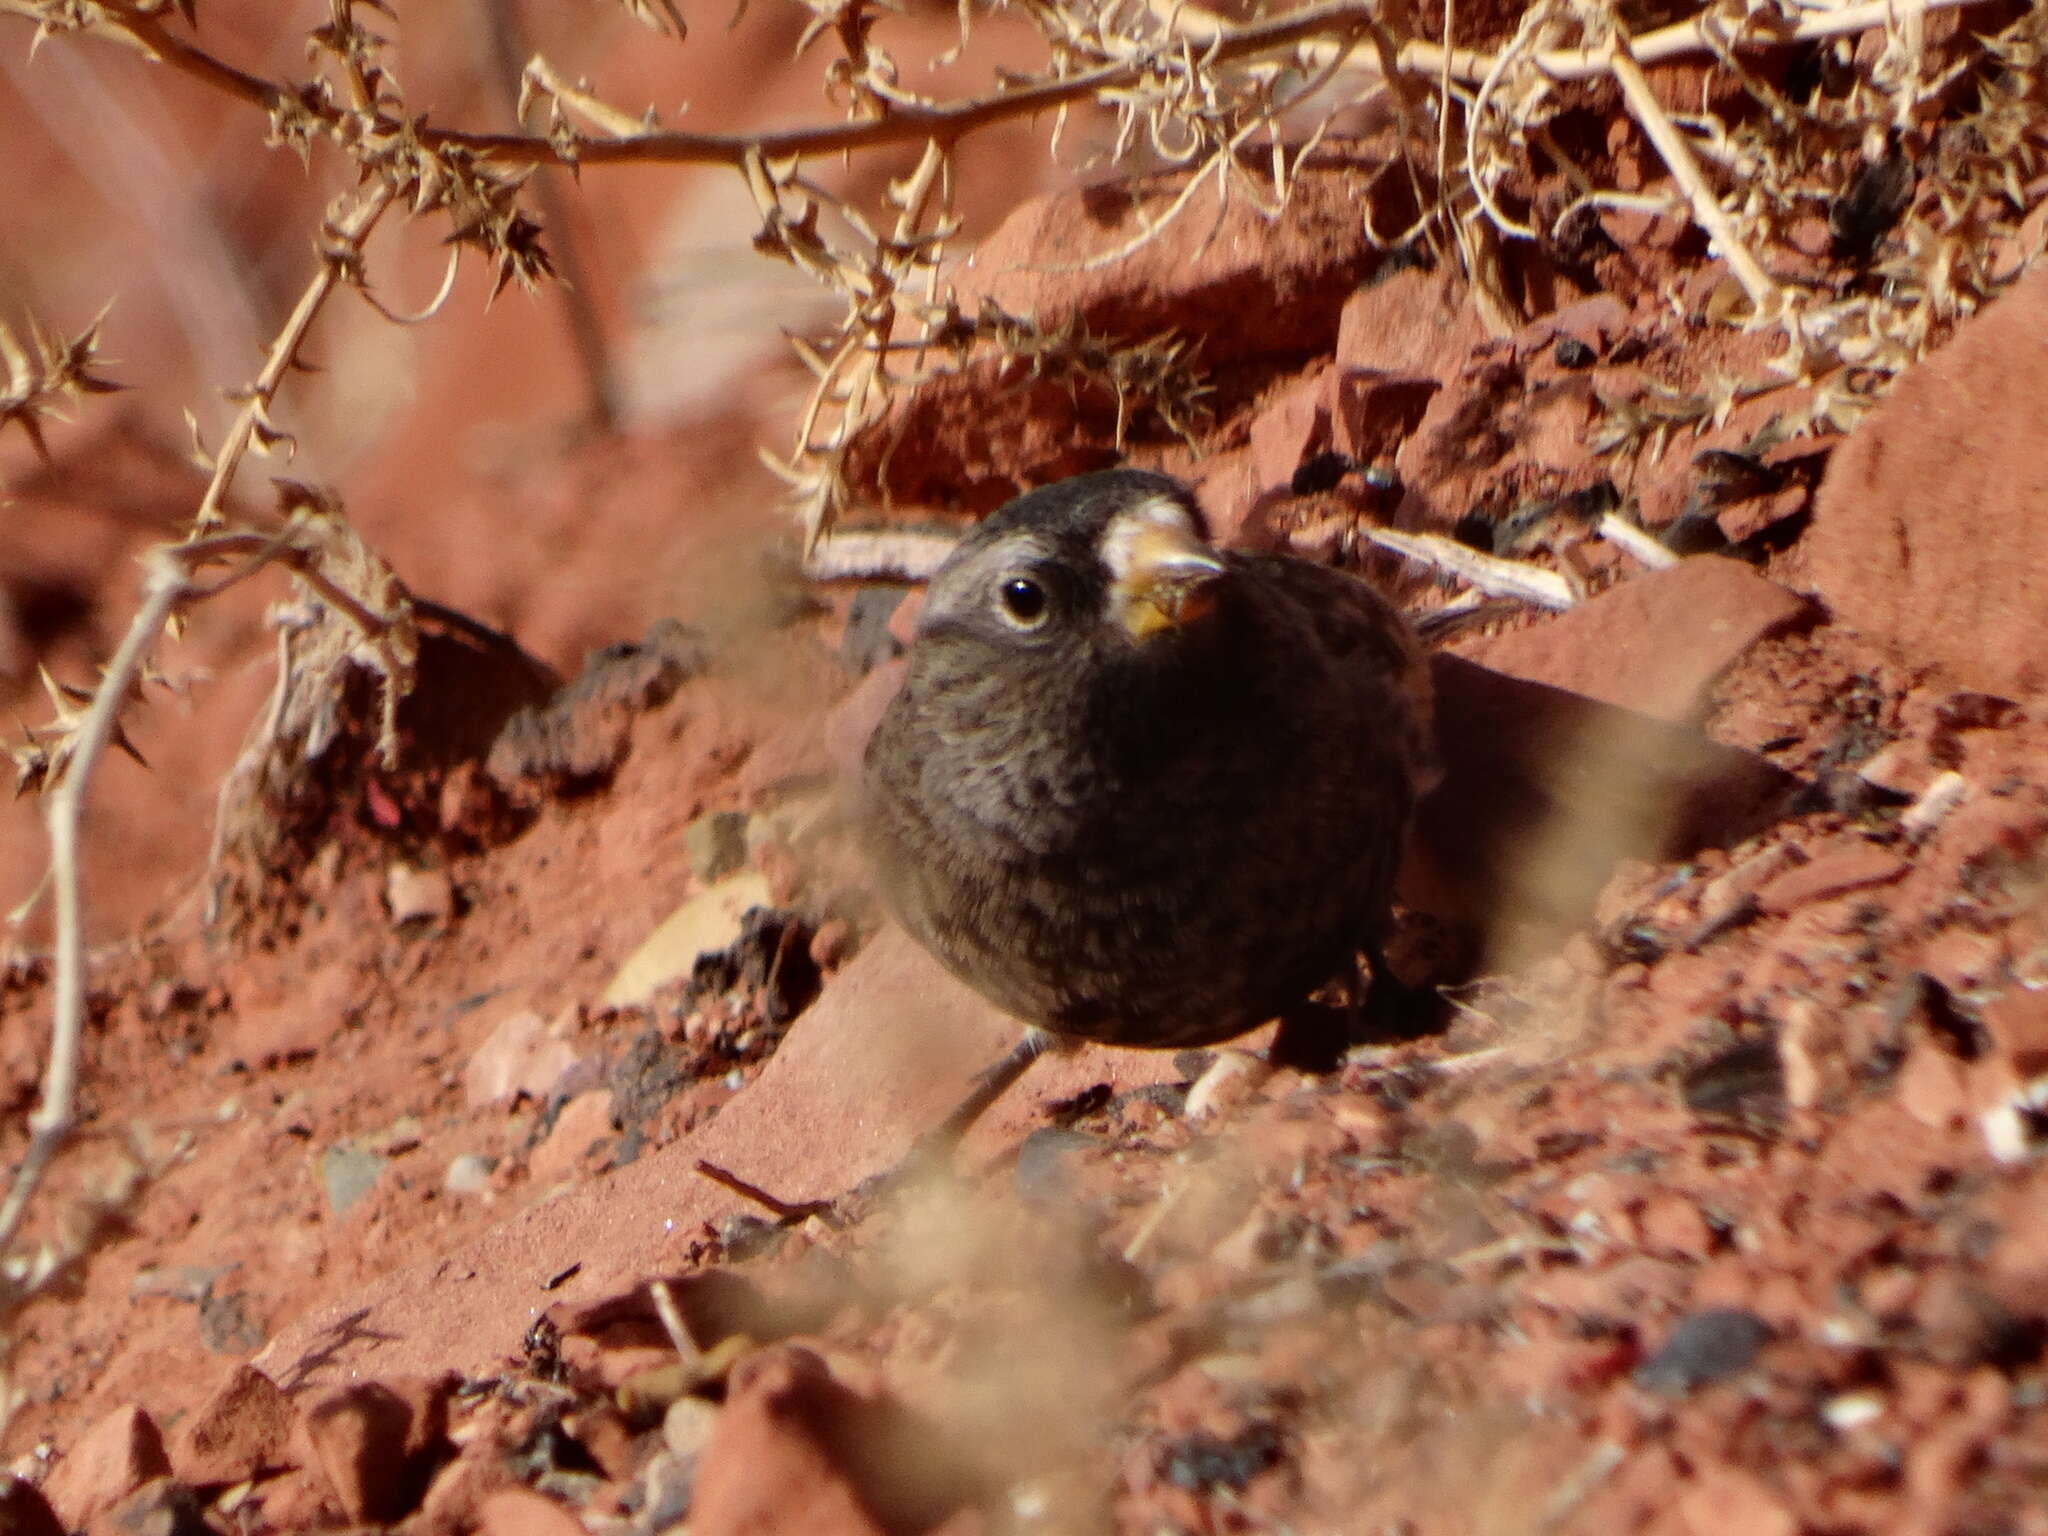 Image of Black Rosy Finch